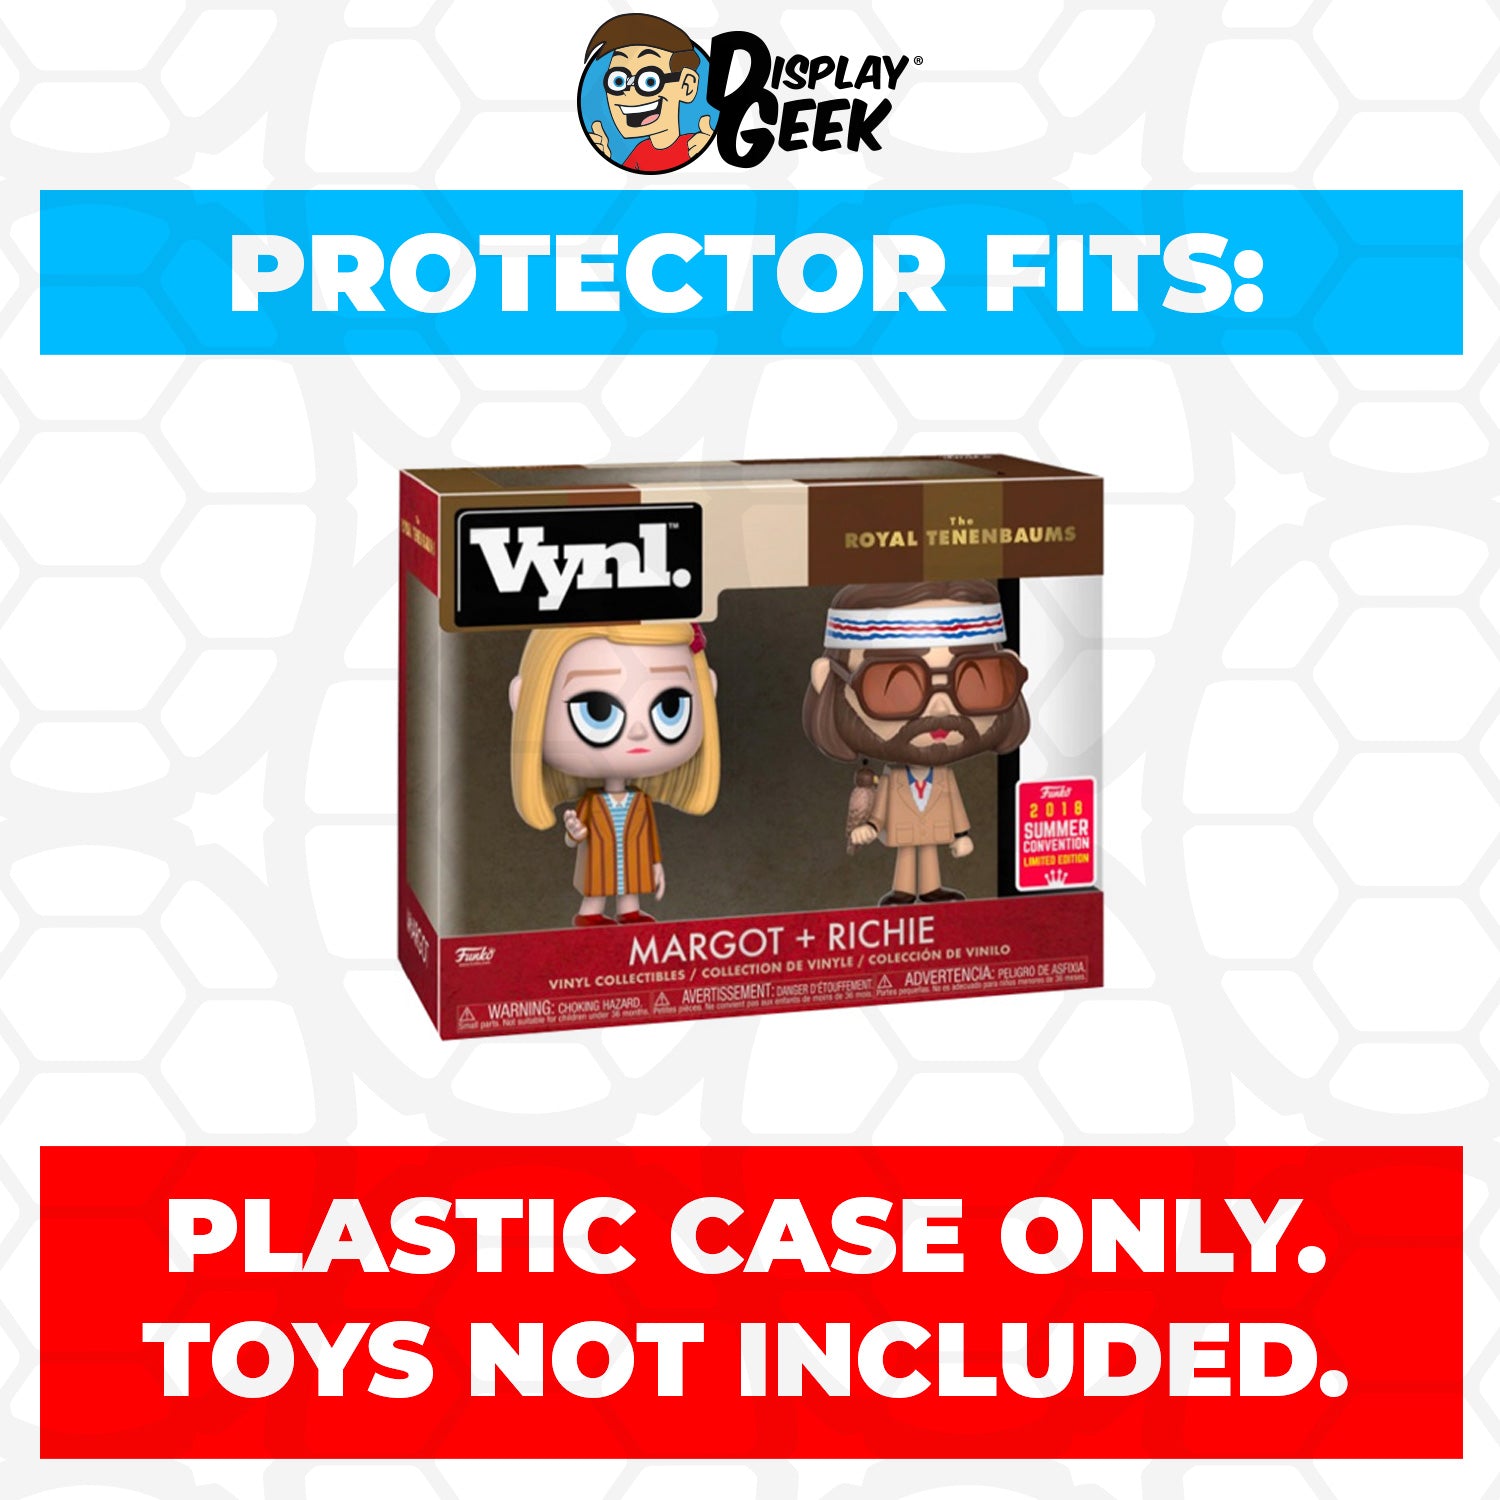 Pop Protector for Vynl 2 Pack Margot & Richie SDCC Funko - PPG Pop Protector Guide Search Created by Display Geek